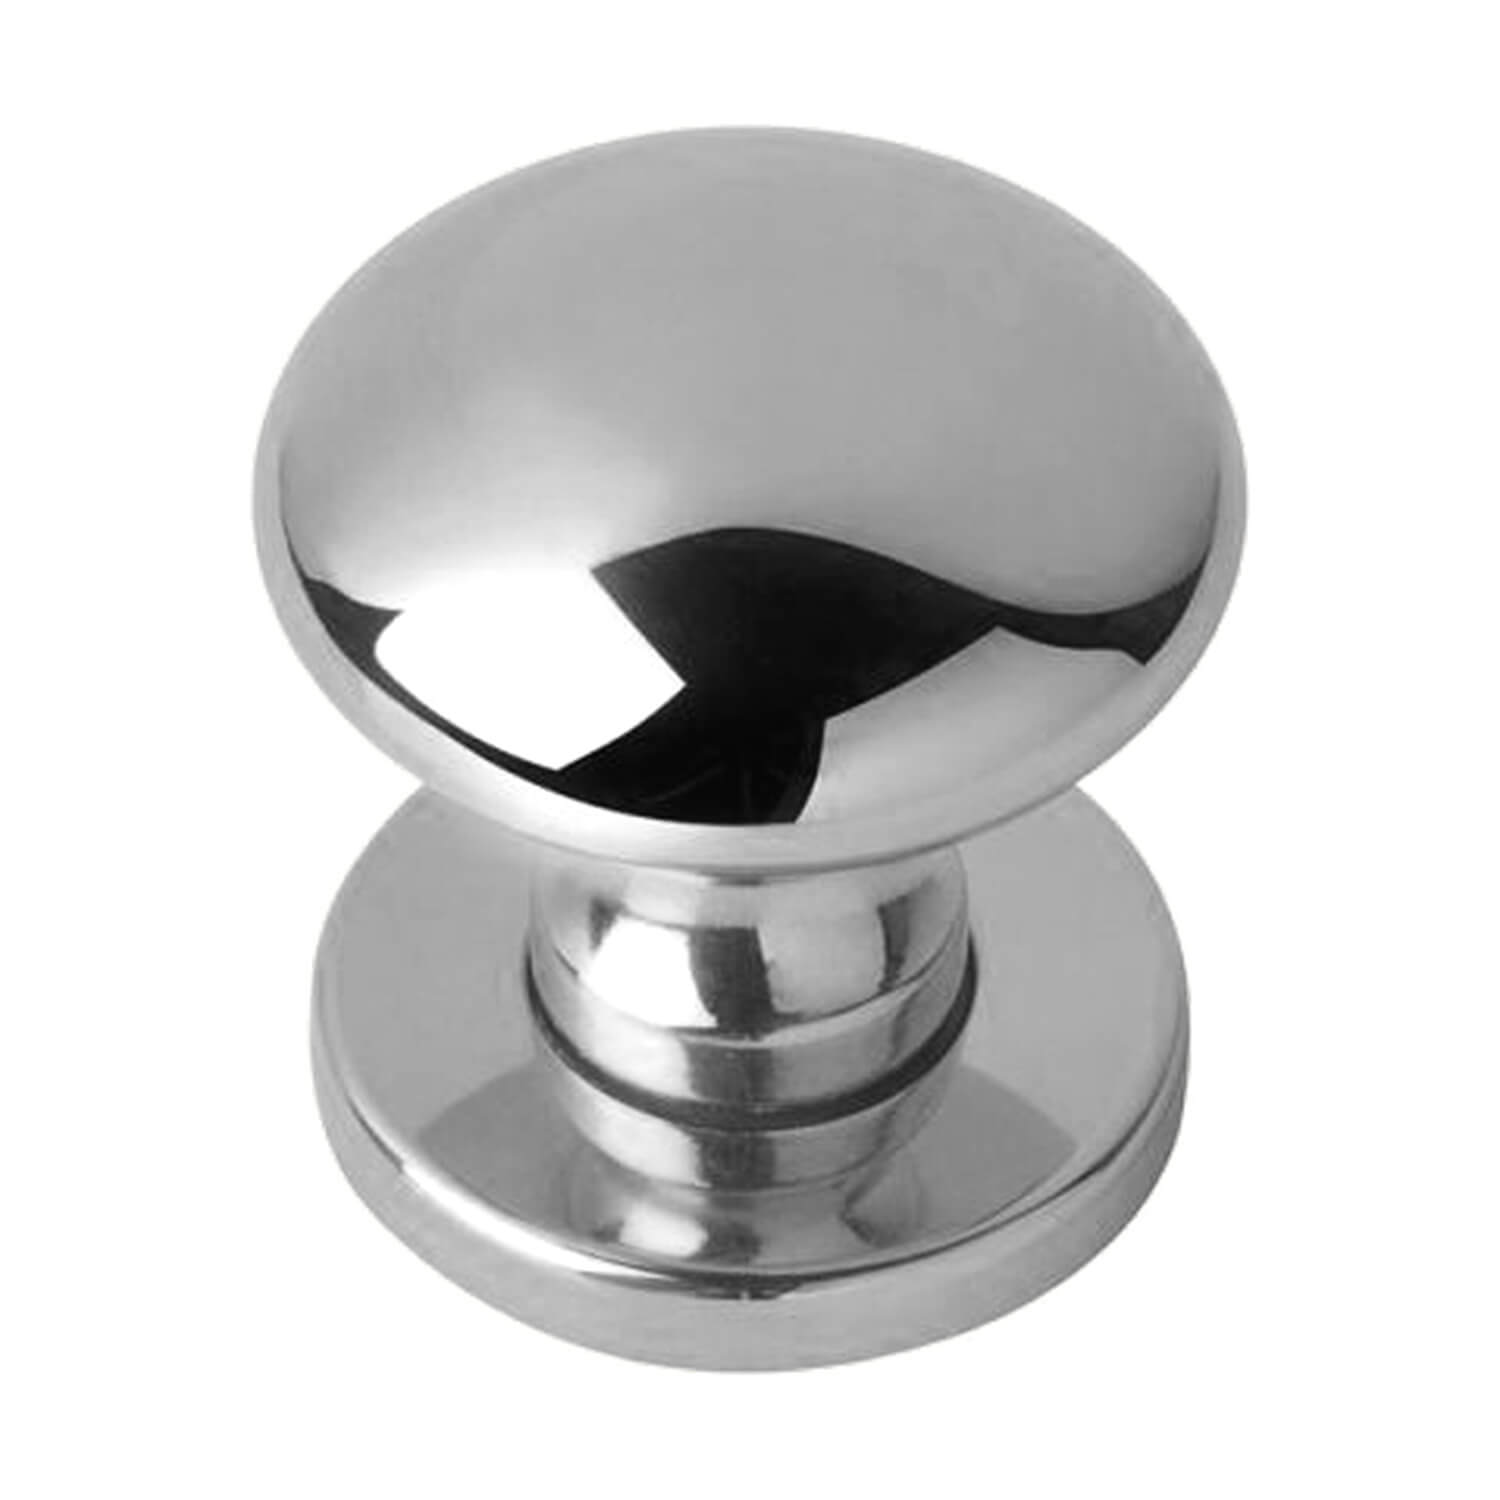 Door knob Single-turning, Chrome Plated, ORION, 50mm - Chrome and ...